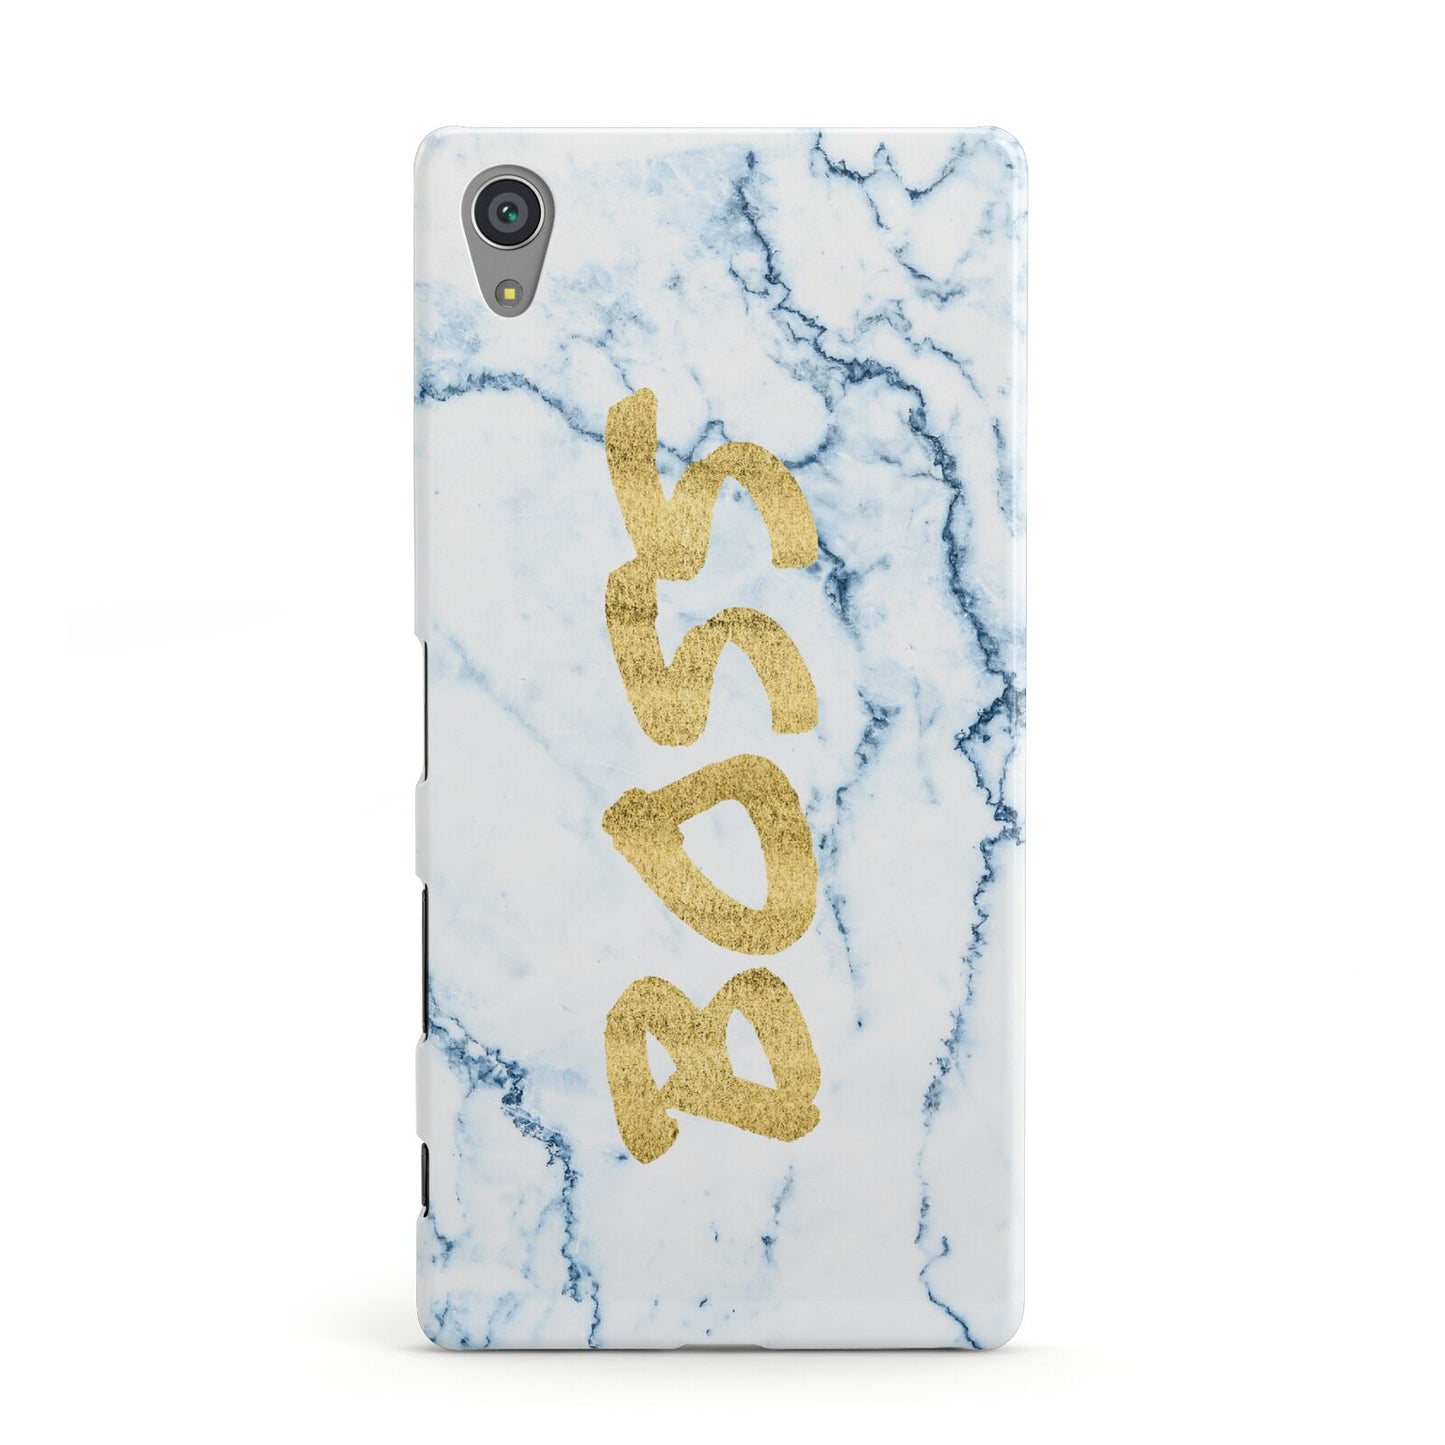 Boss Gold Blue Marble Effect Sony Xperia Case